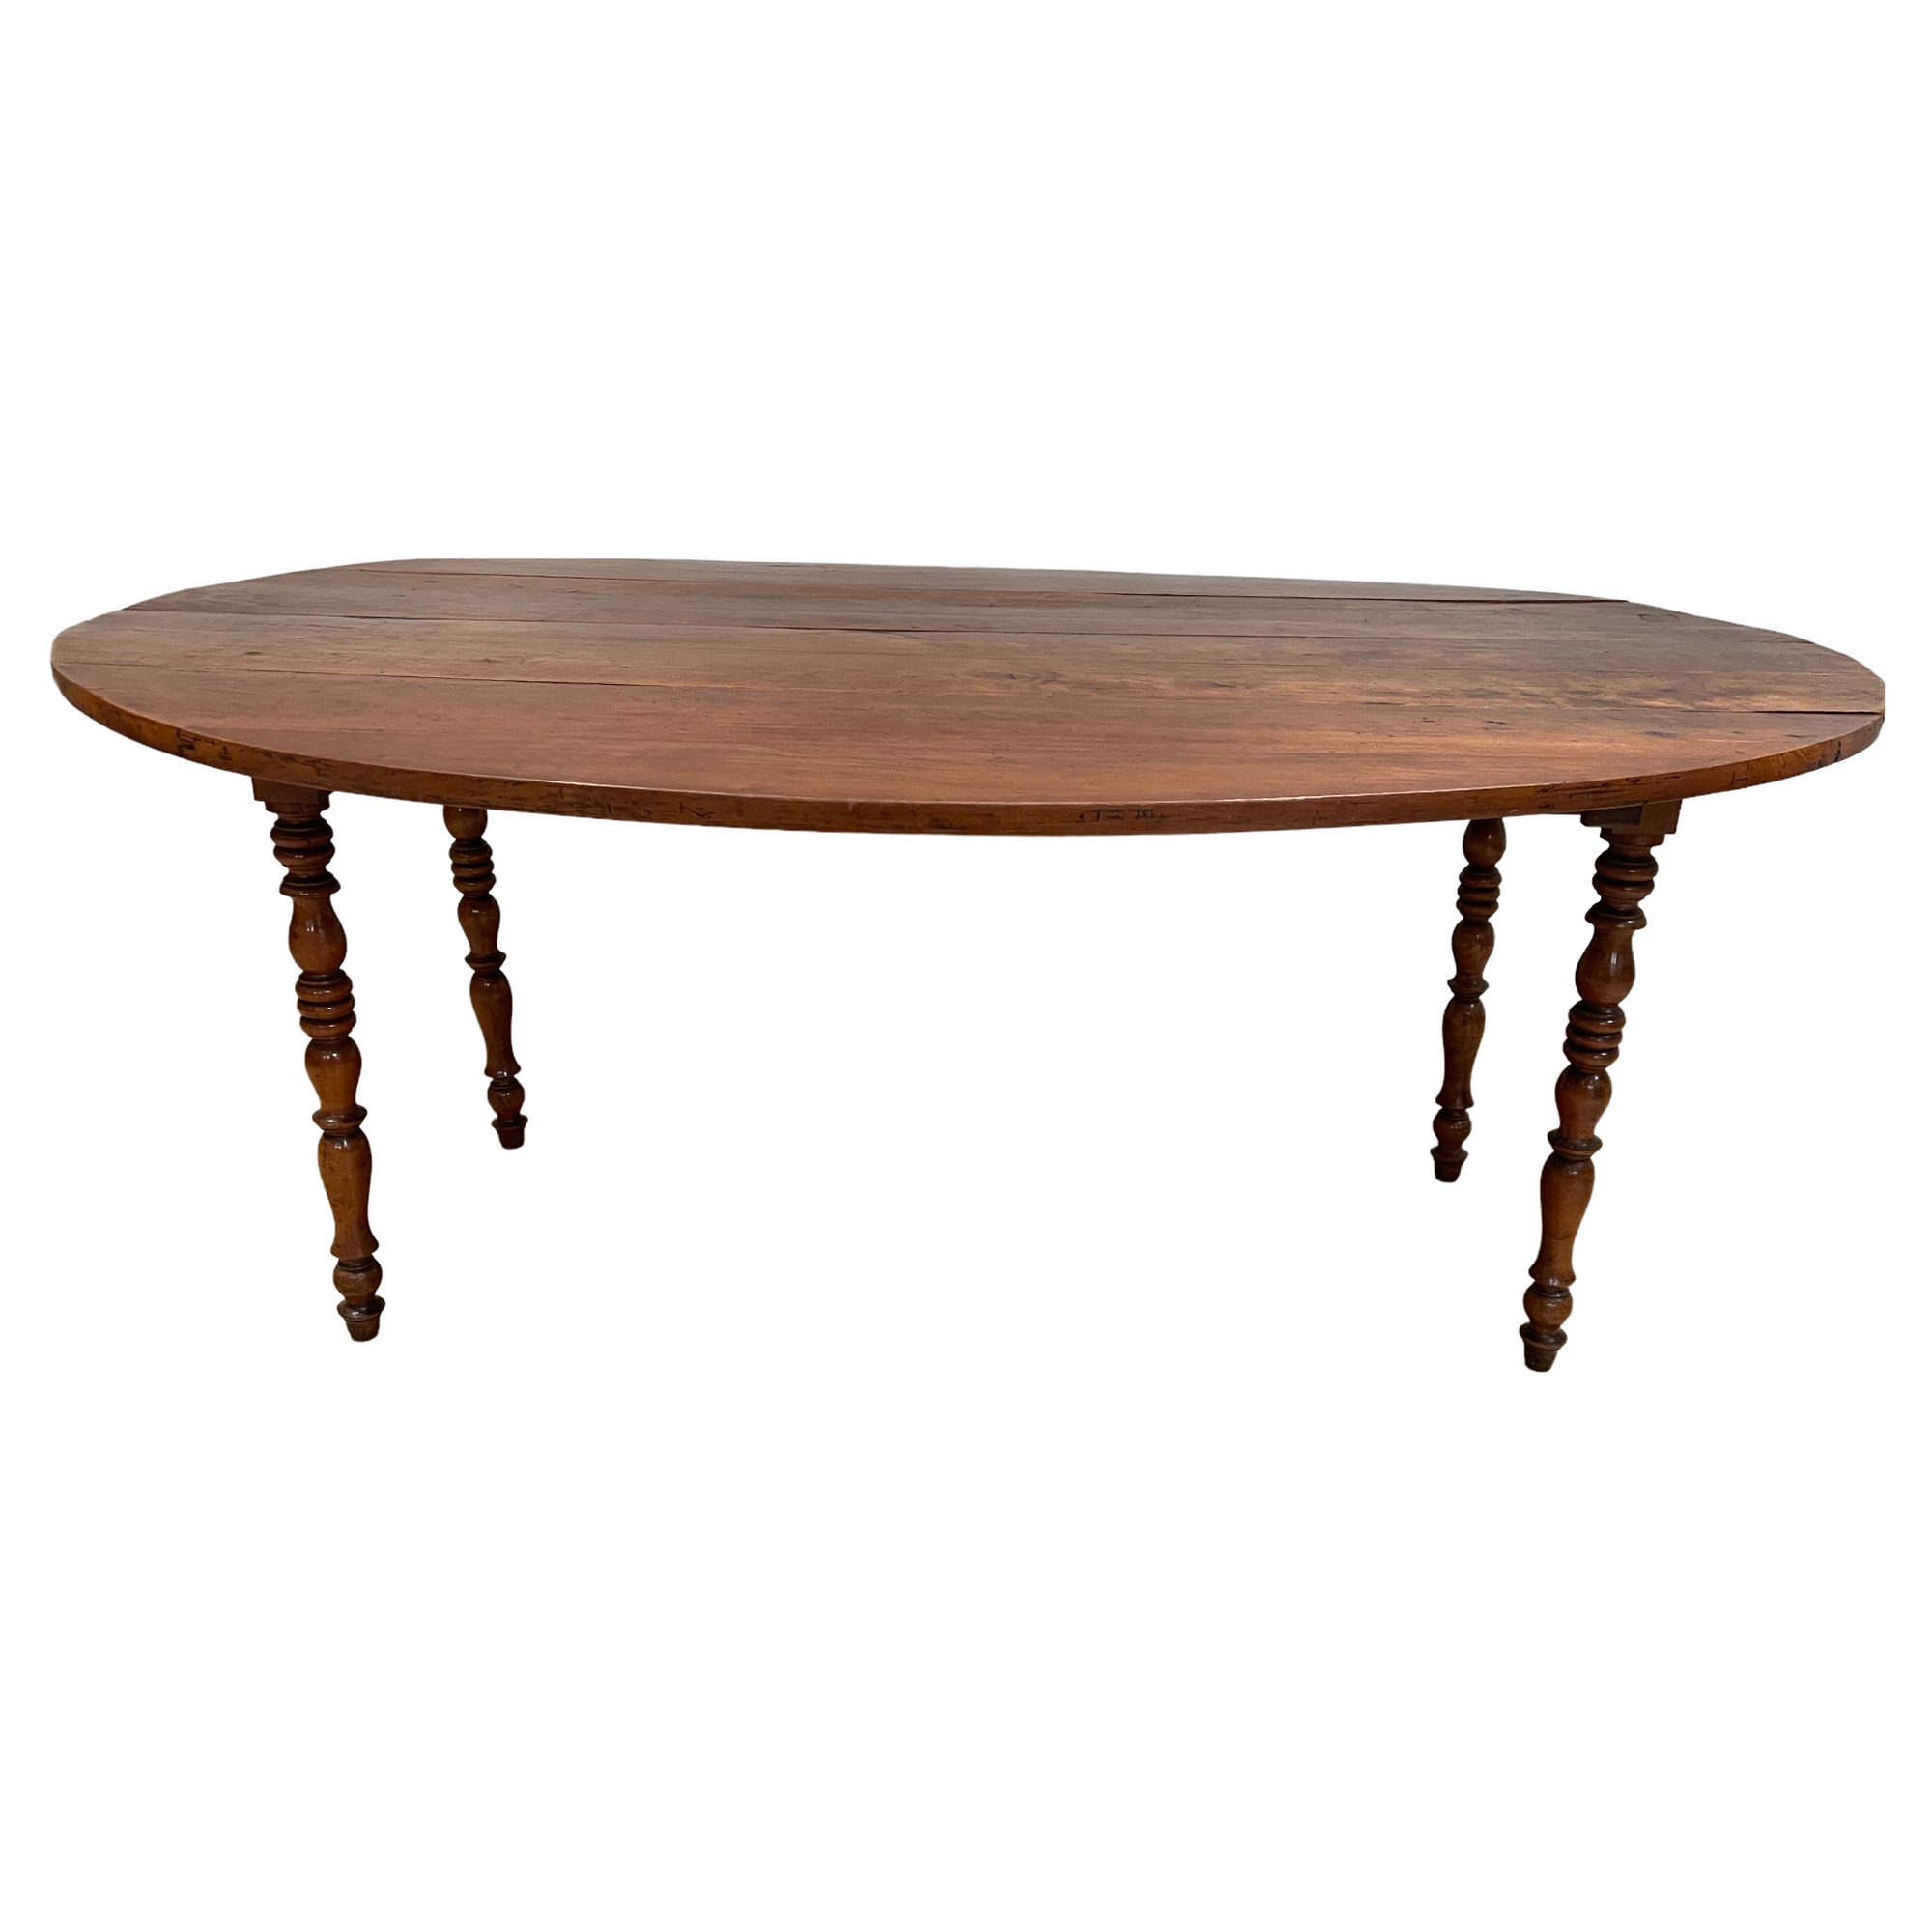 Oval Drop Leaf Cherry French Country Table